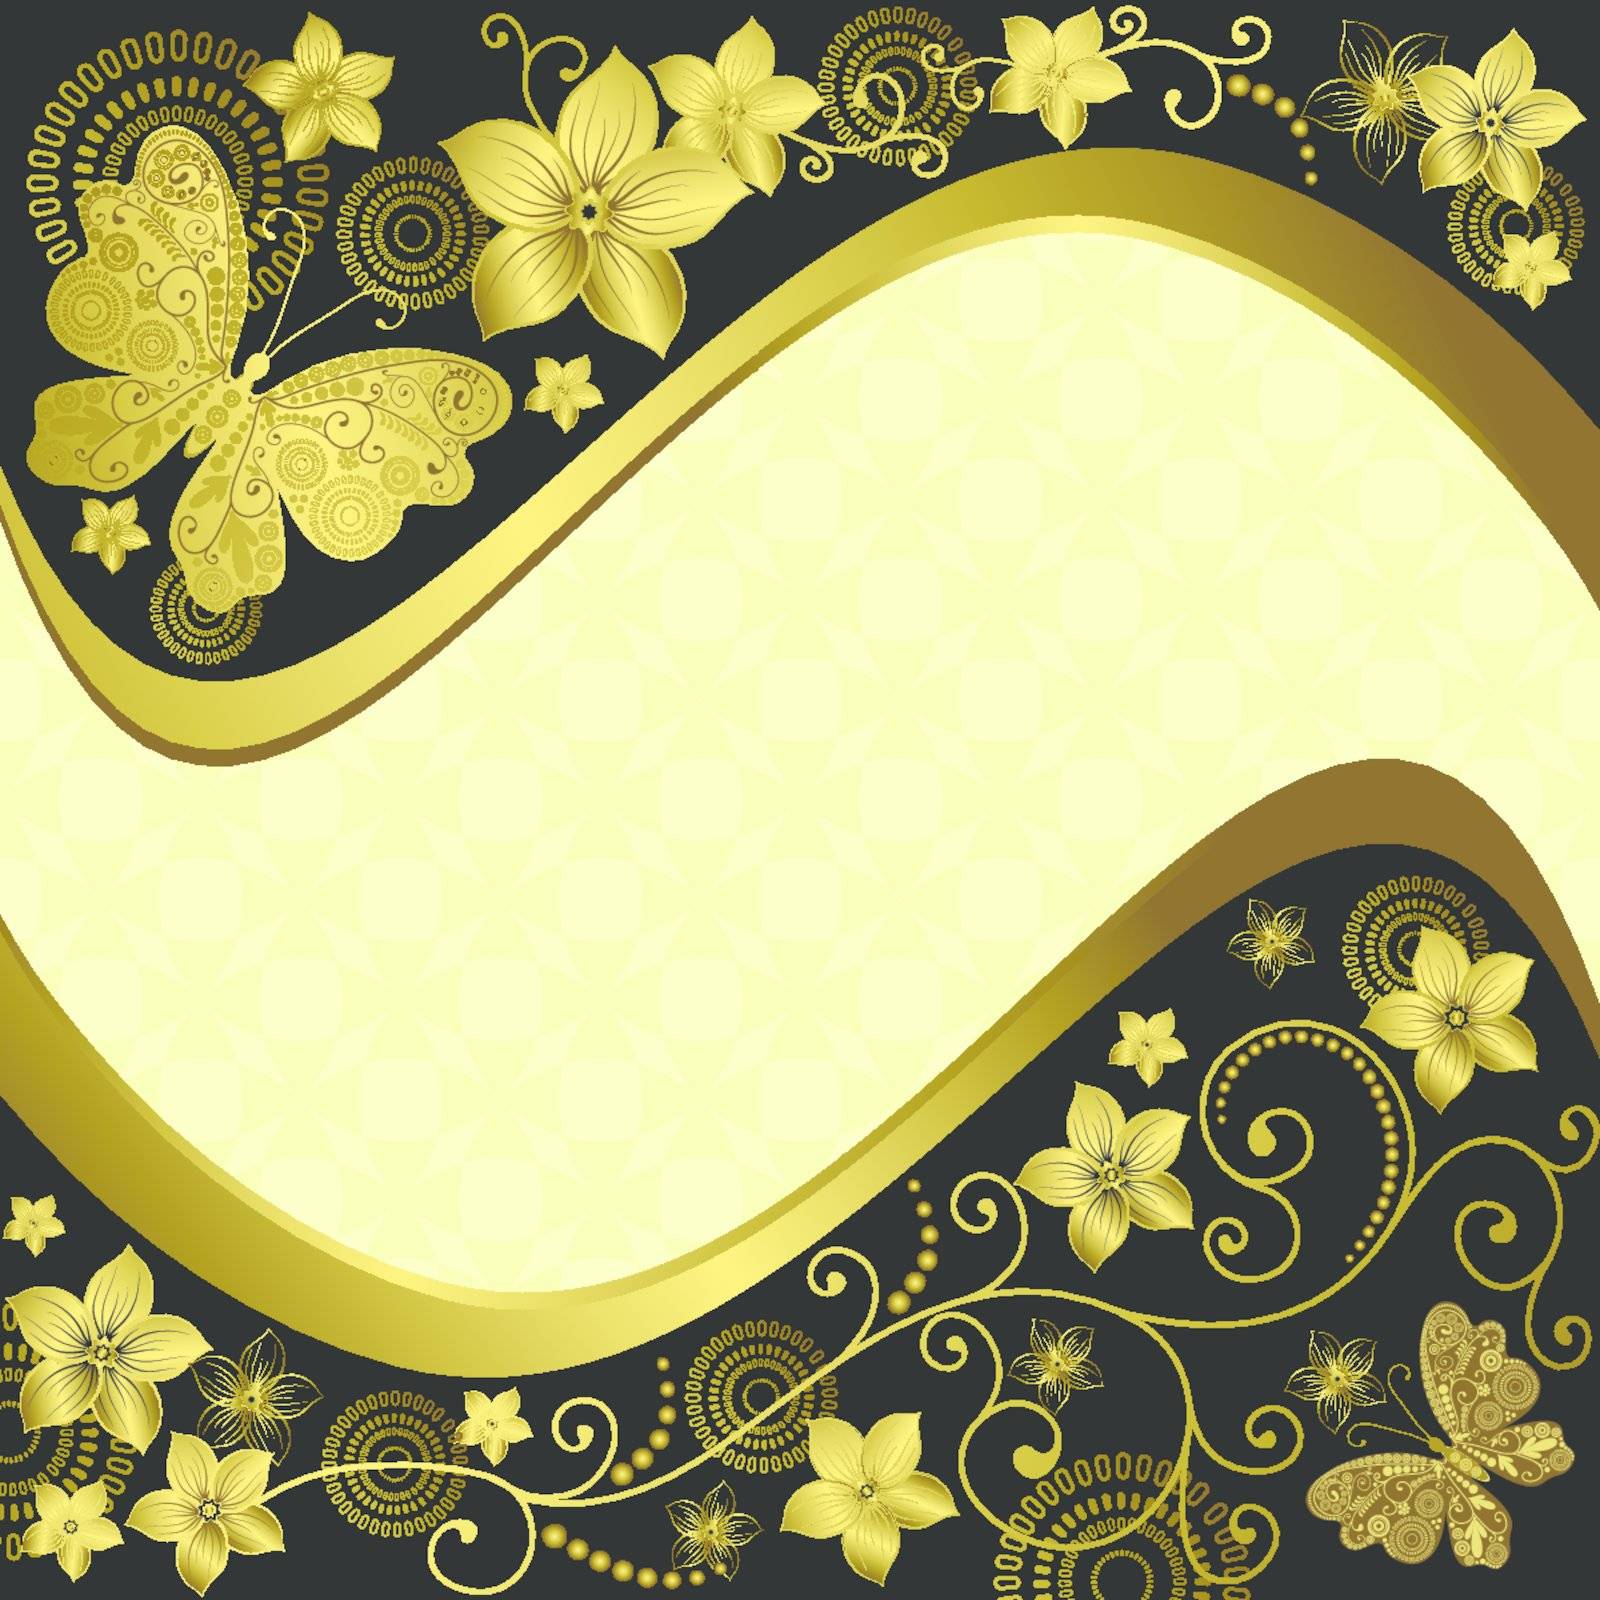 Decorative black and golden frame with flowers and butterflies (vector)